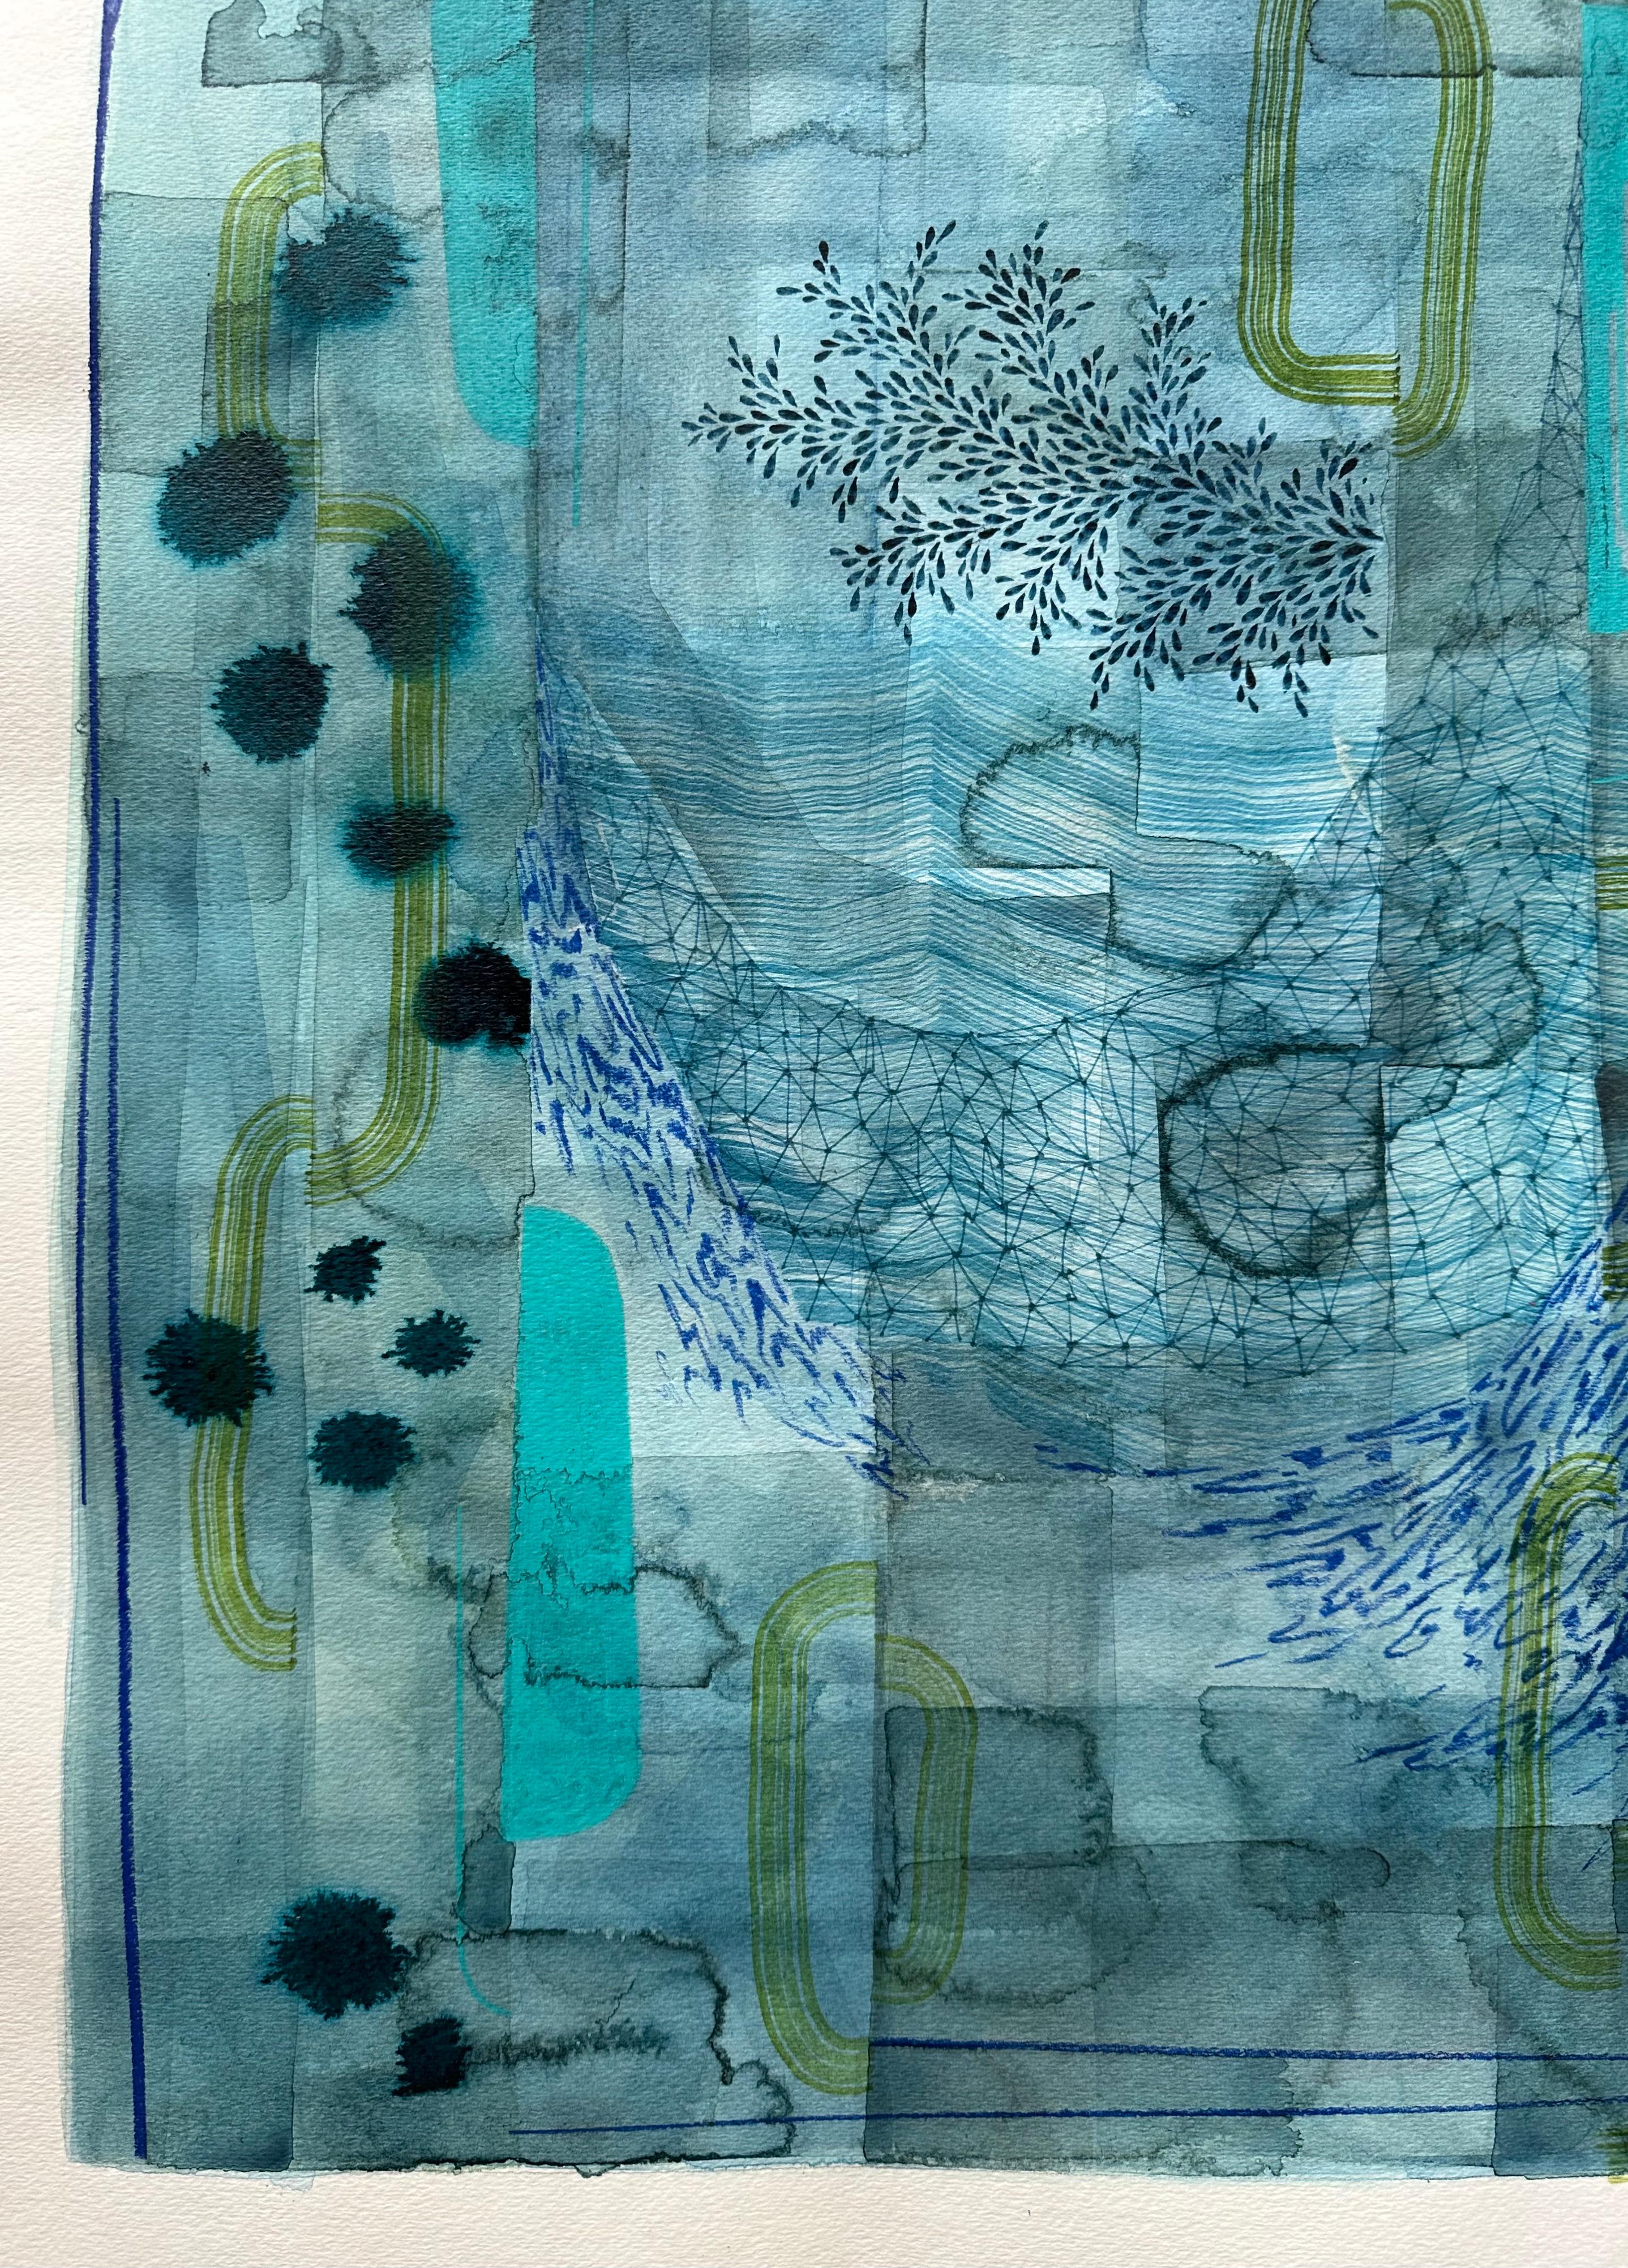 Untitled 600, Teal Blue, Olive Green, Indigo Patterns, Abstract Landscape - Art by Gabe Brown